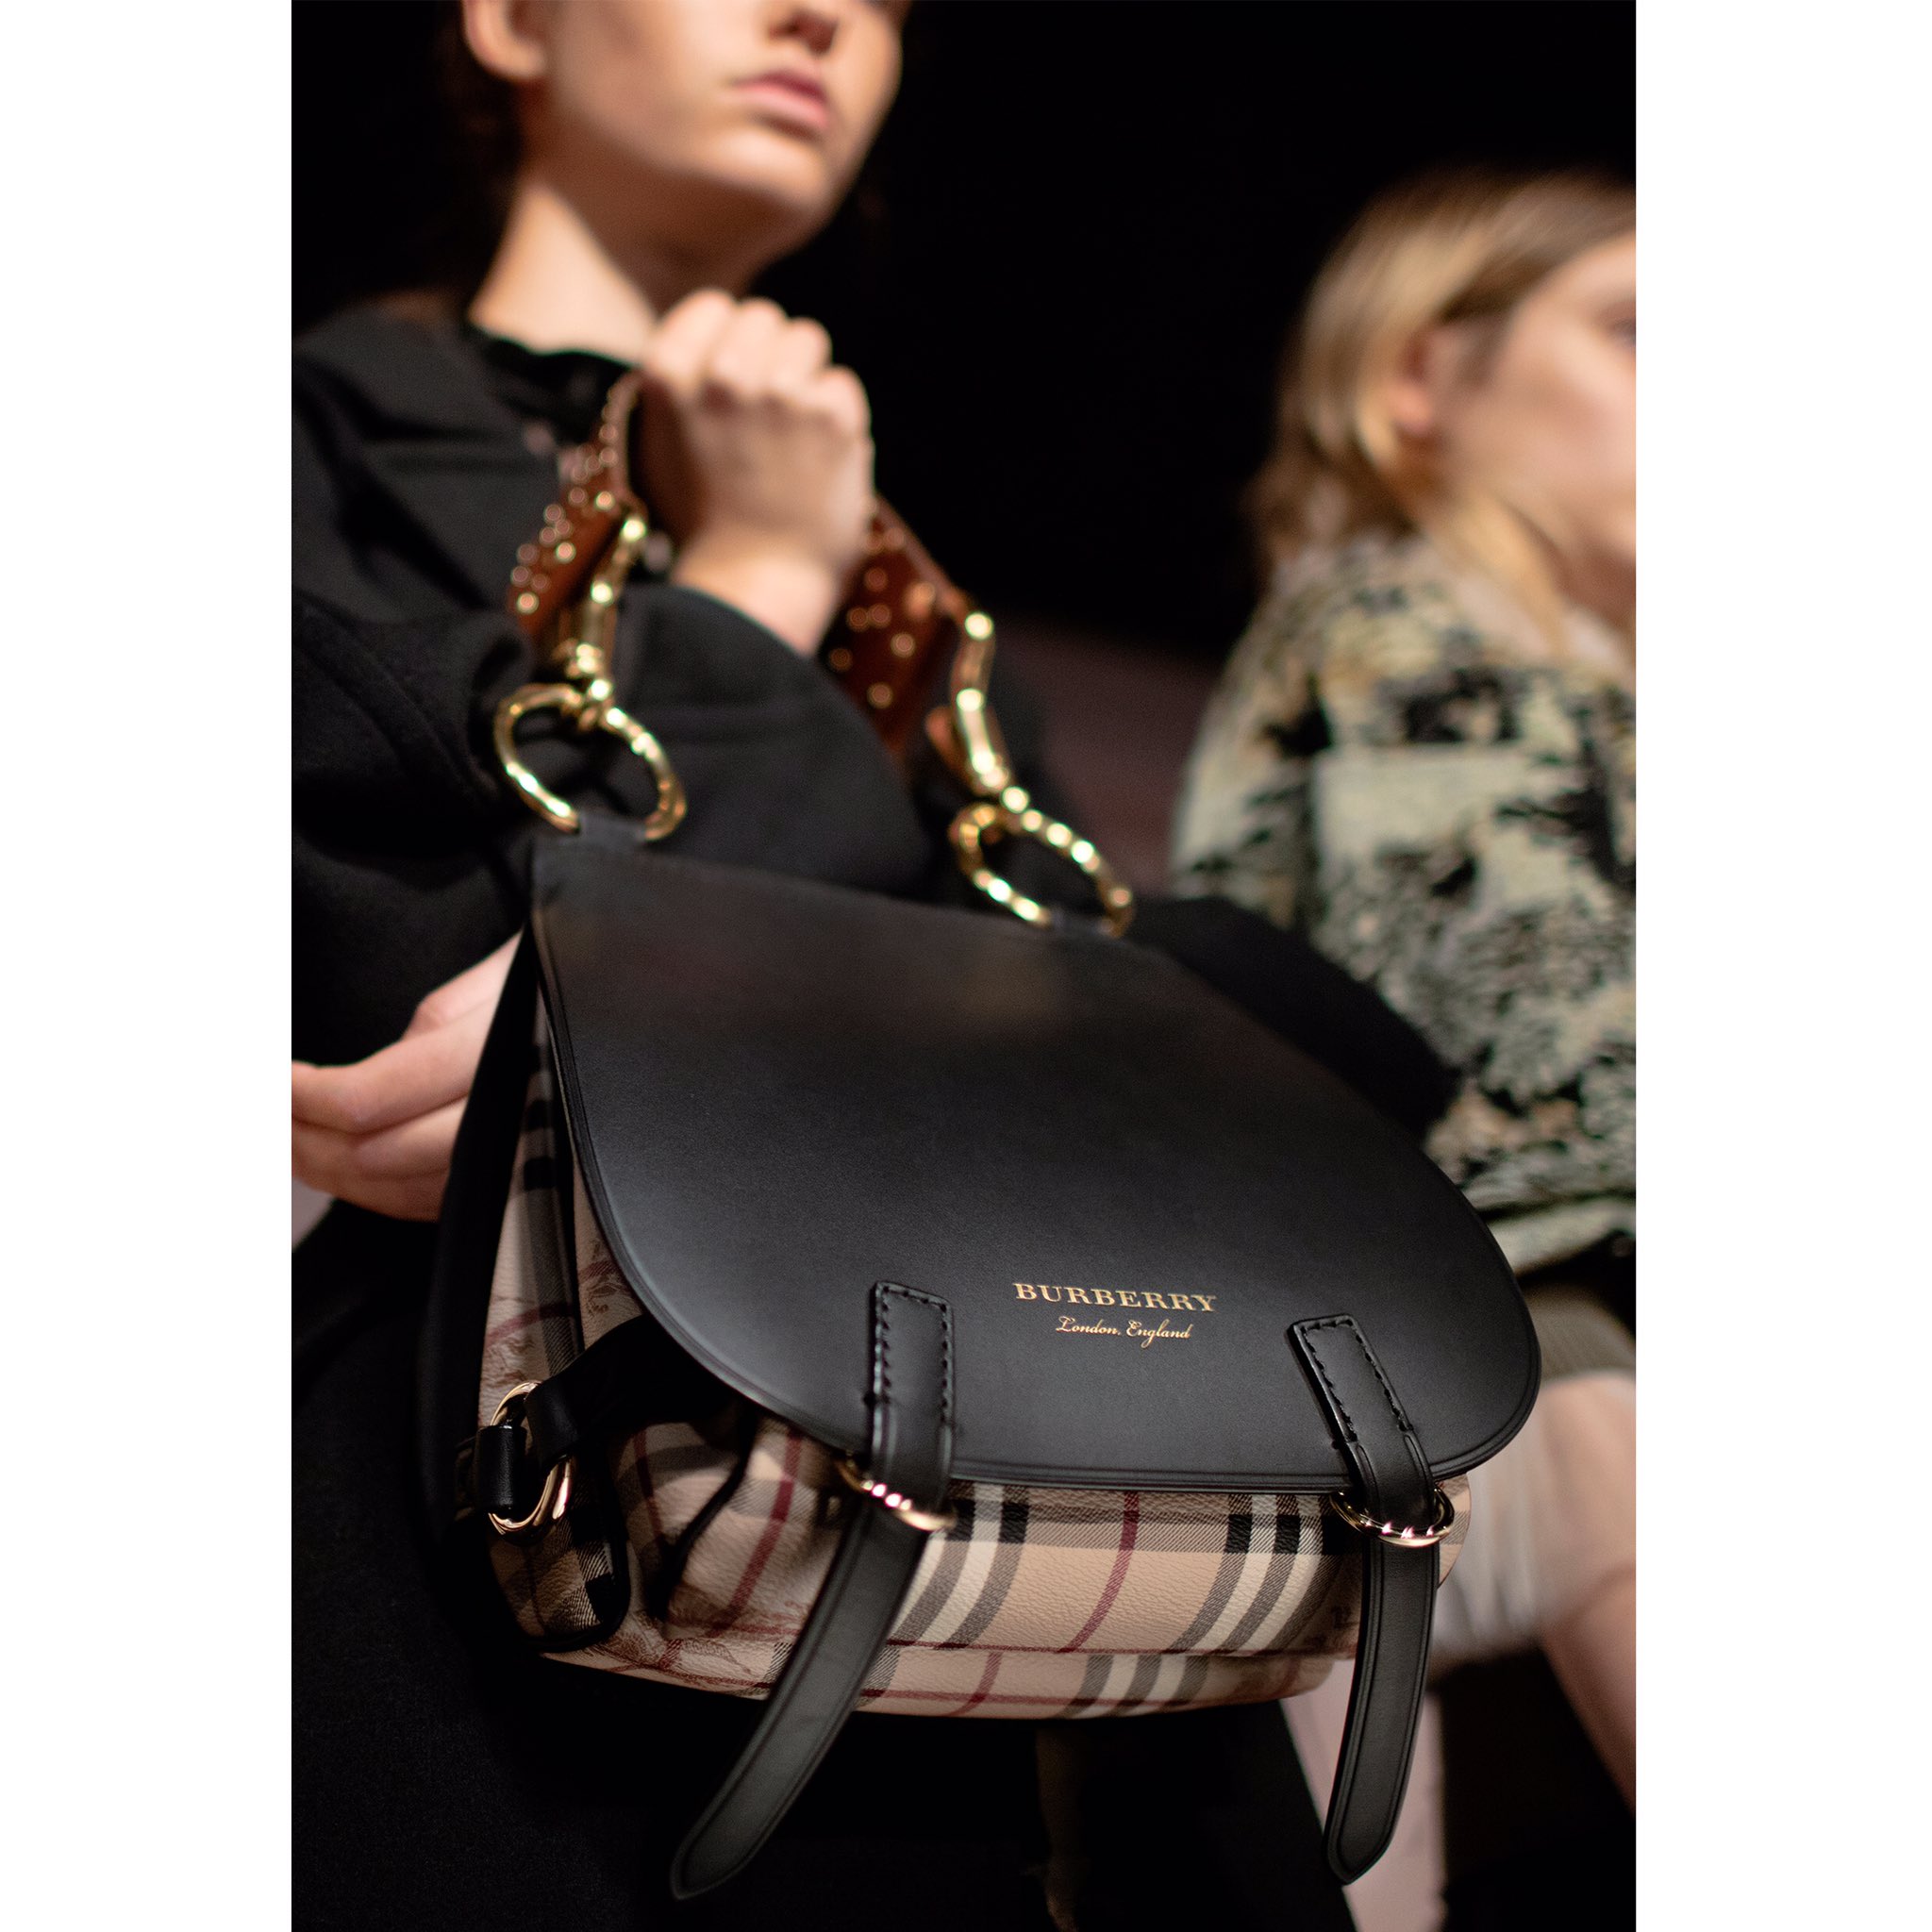 Burberry on Twitter: "The Bridle Bag, seen on the models backstage at the @ Burberry show. Shop the show https://t.co/g7AlPQFz8t #BurberryMakersHouse https://t.co/MyxmtSc37L" / Twitter